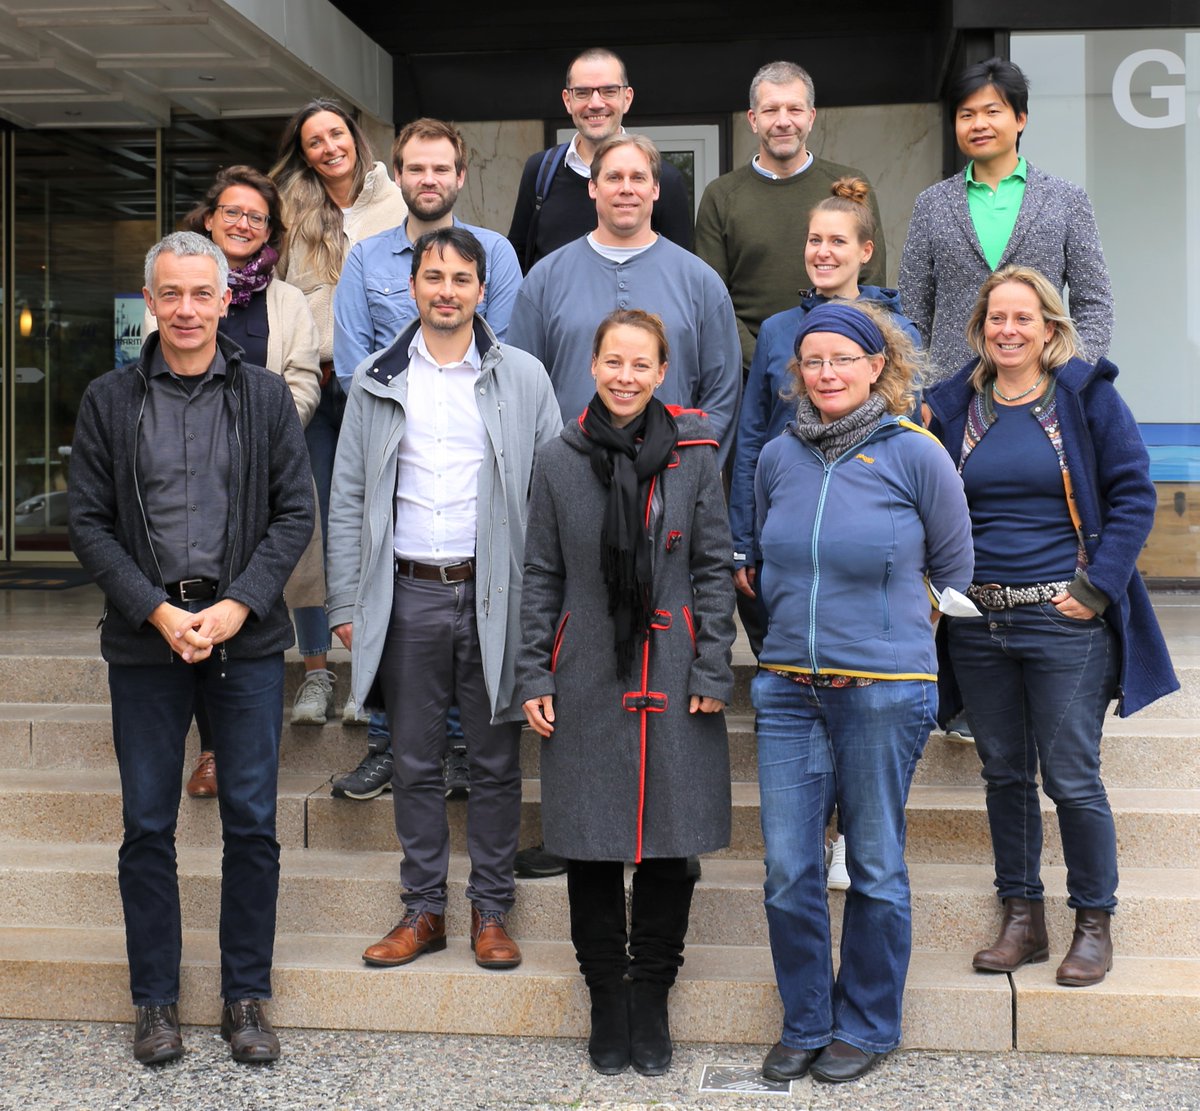 Today, #ASMASYS researchers gather for their 2nd annual meeting in Travemünde to discuss the progress on the transdisciplinary framework to asses #marineCDR options. We currently focus on the grouping of criteria. @CDRterra #DAM